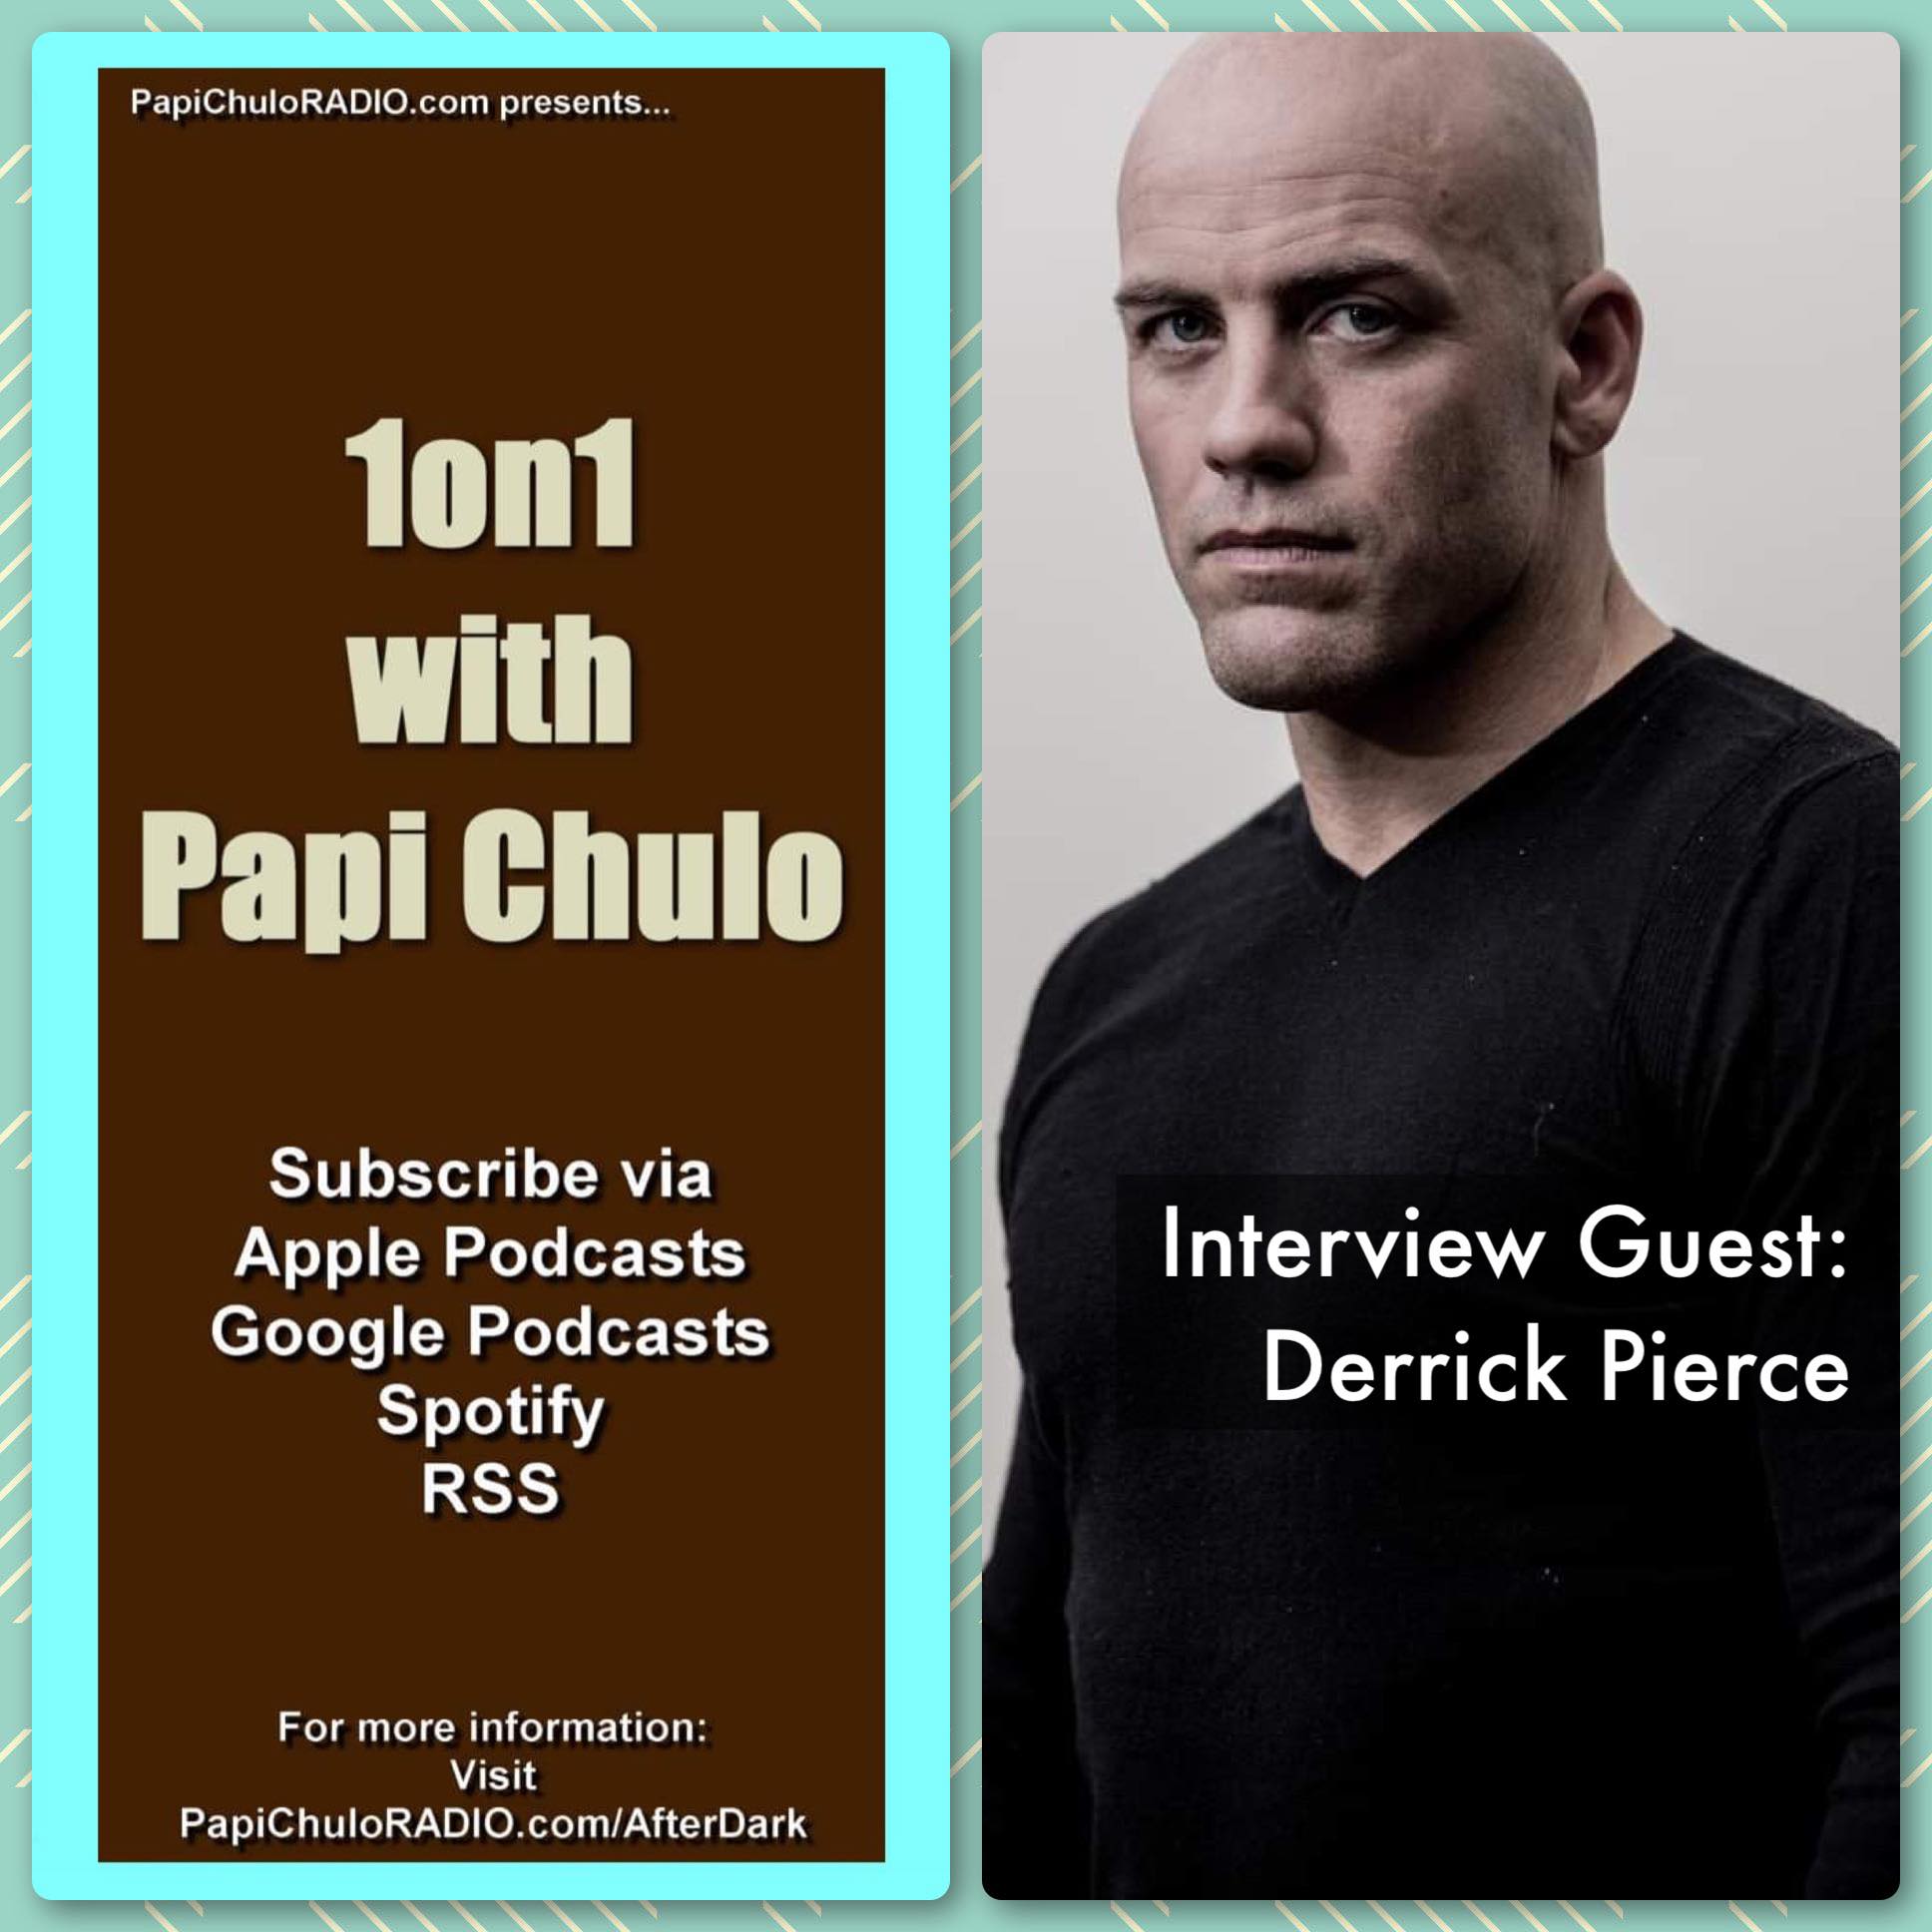 1on1 with Papi Chulo – Special Guest: DERRICK PIERCE [May 27, 2015]